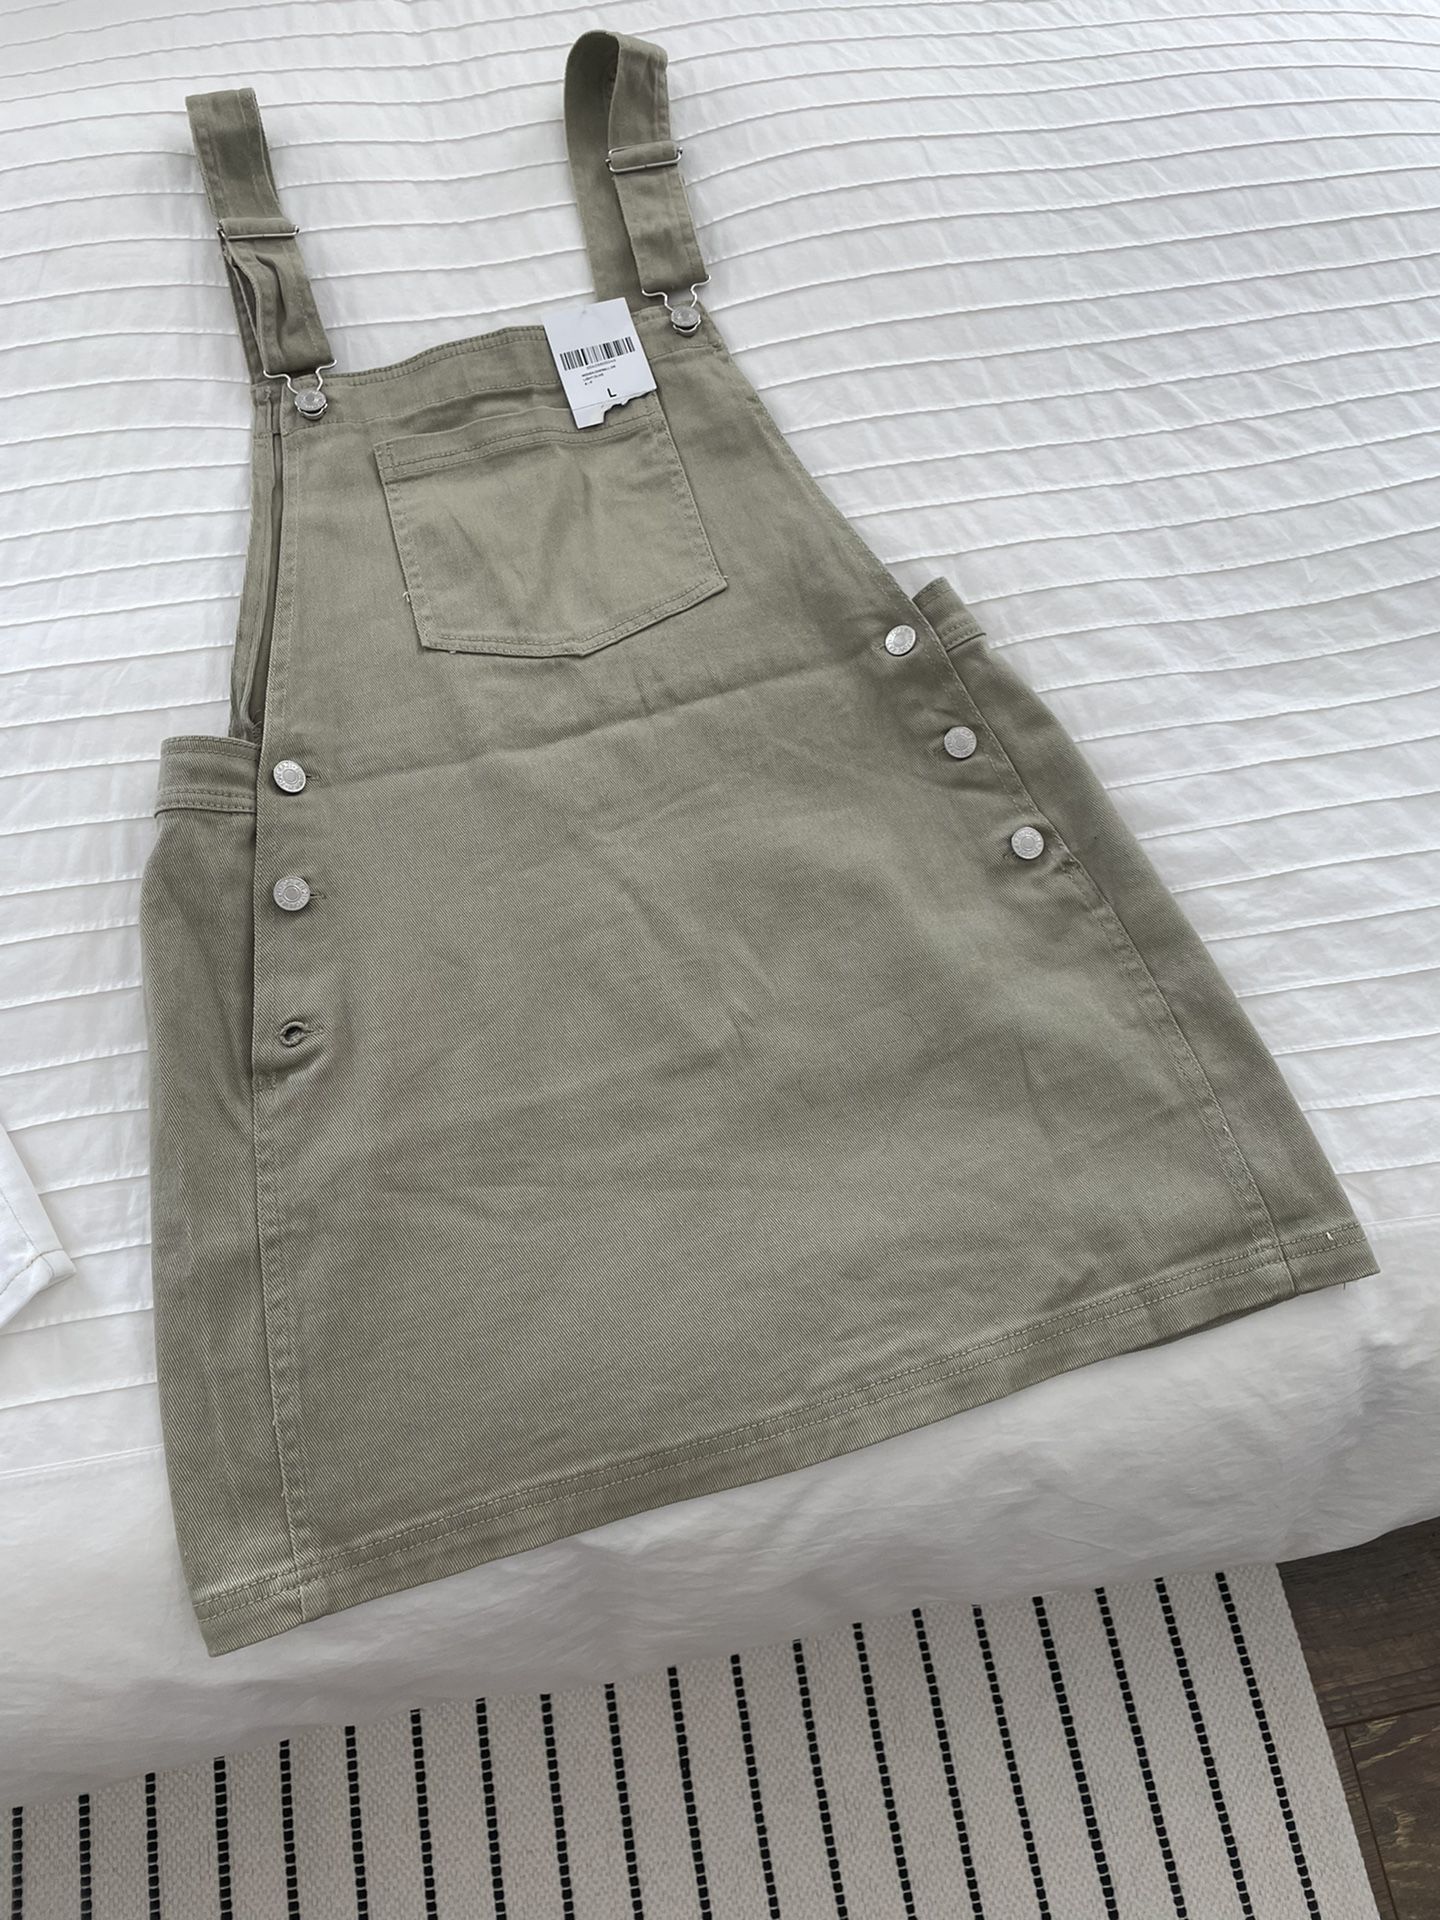 Overall Dress  size Large Light Olive 